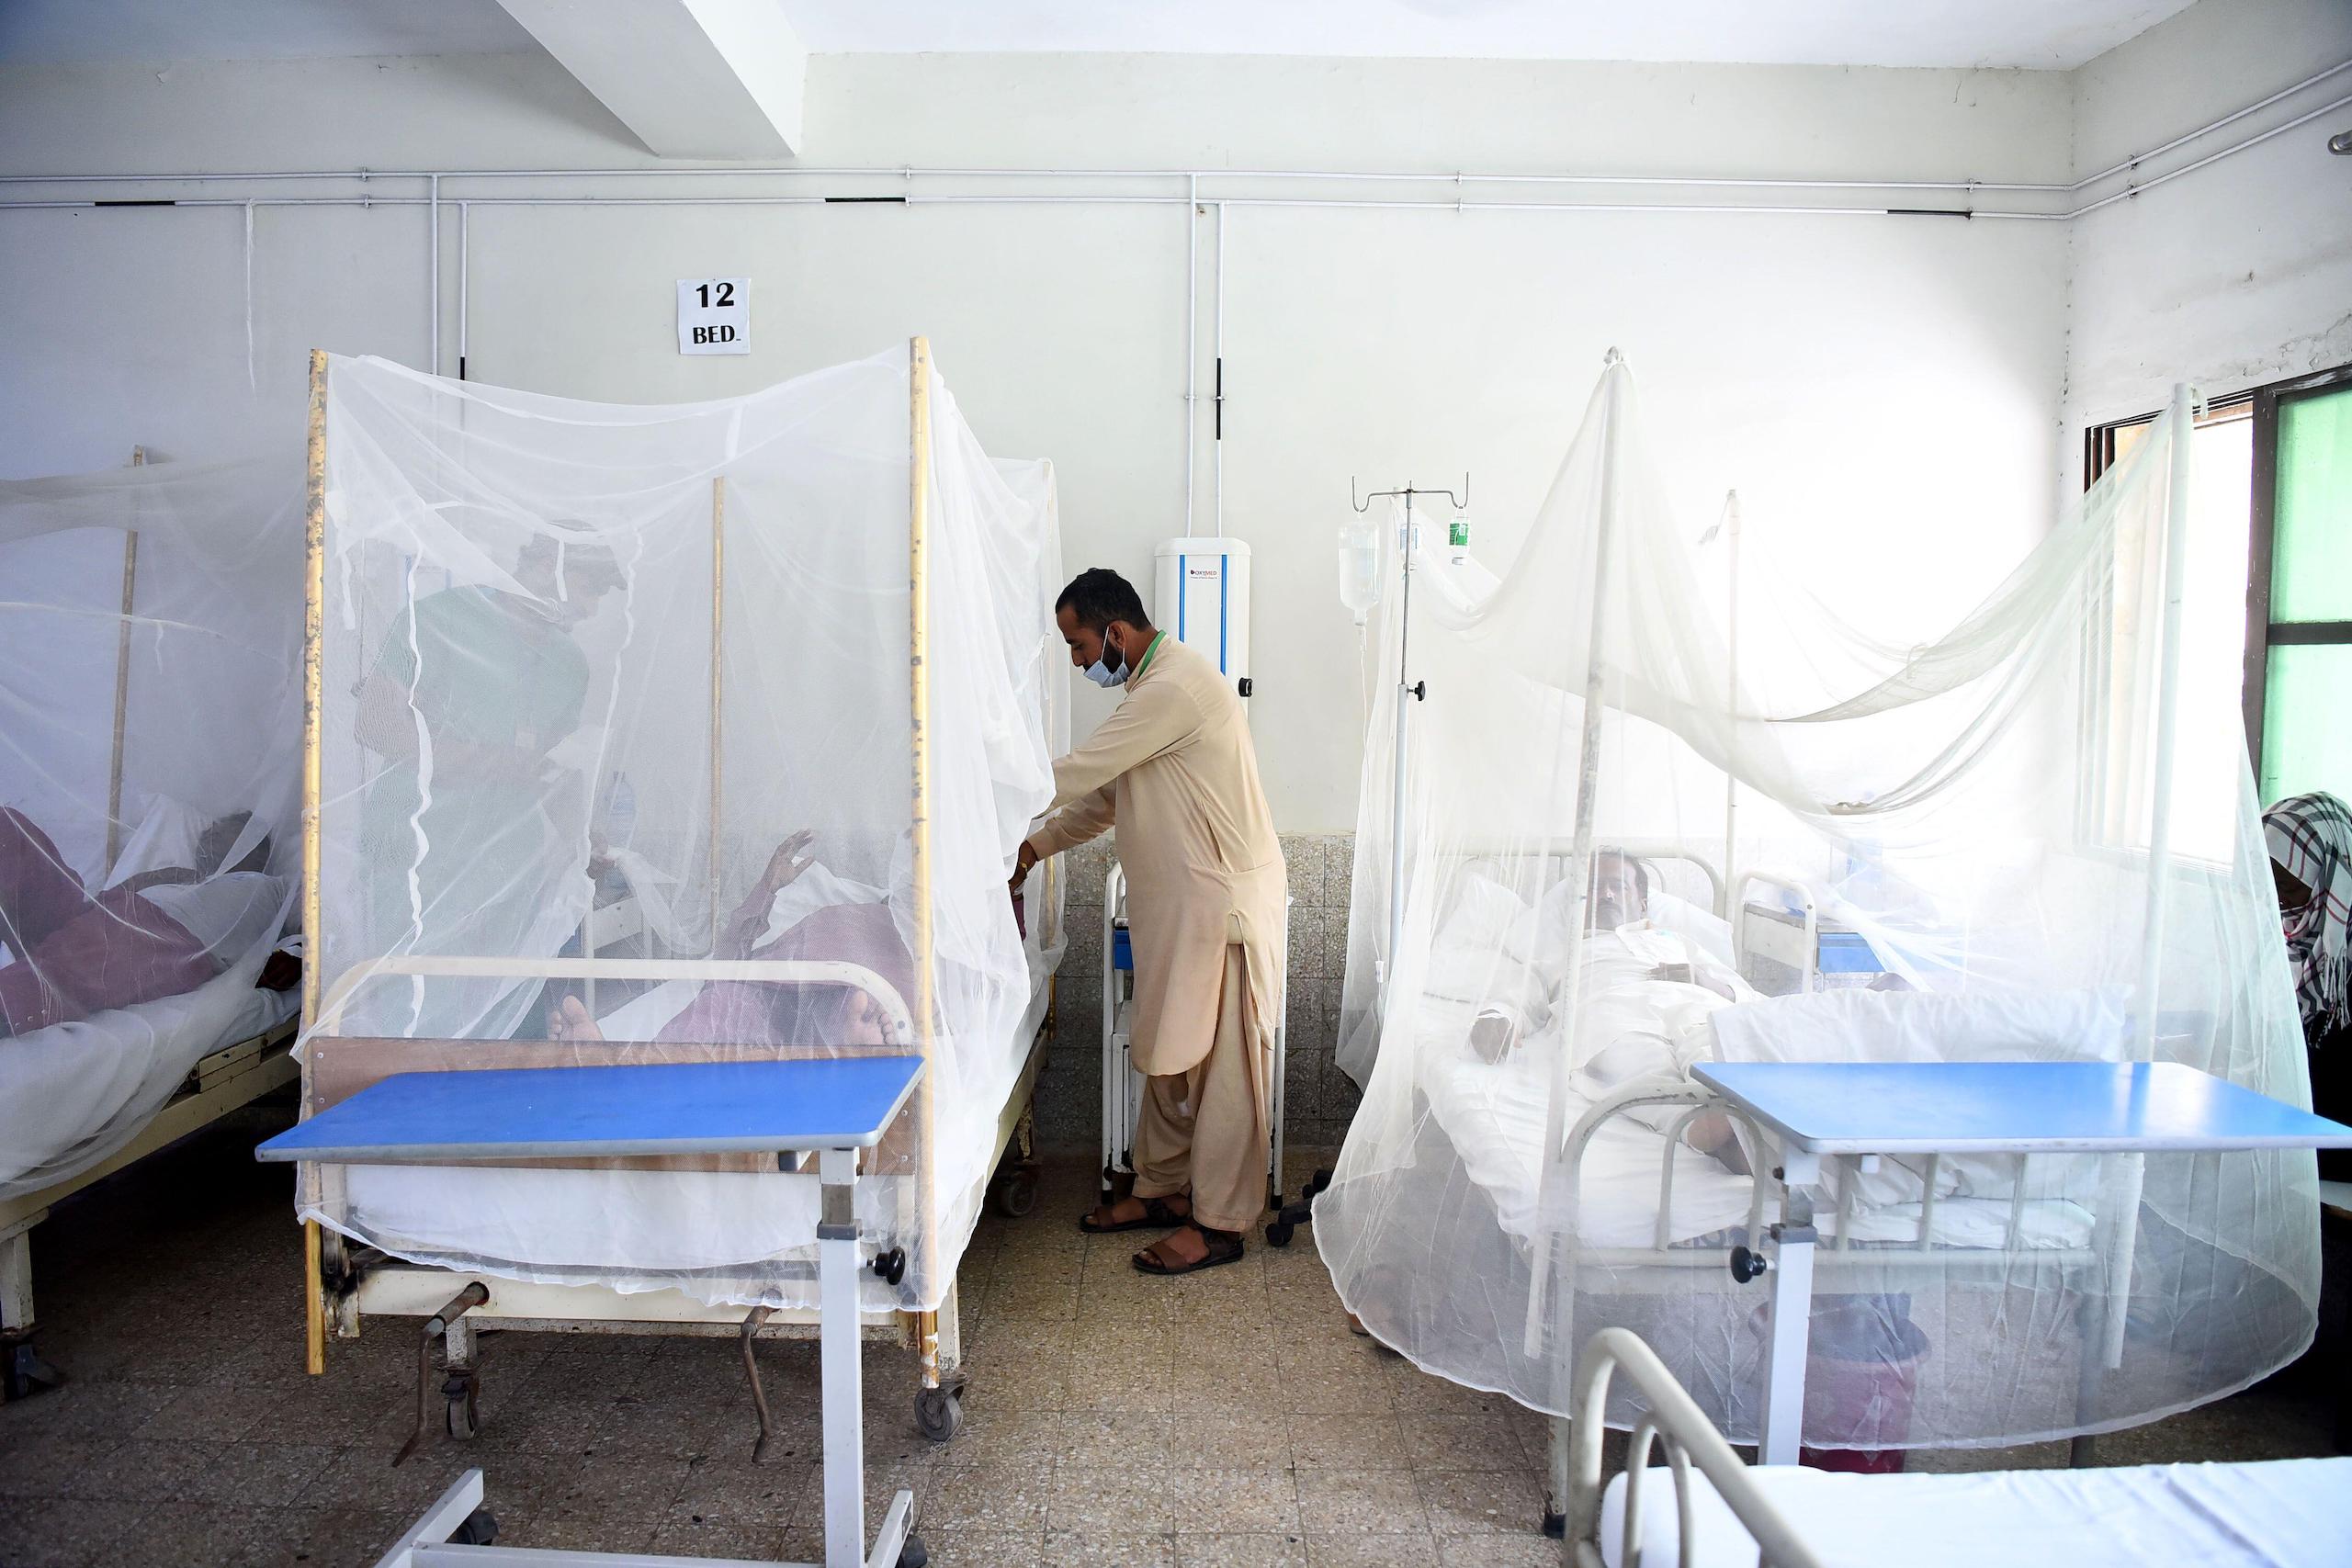 <p>People with dengue fever are treated under mosquito nets at a hospital in Pakistan’s capital Islamabad, on 15 September 2022 (Image: Ahmad Kamal / Alamy)</p>